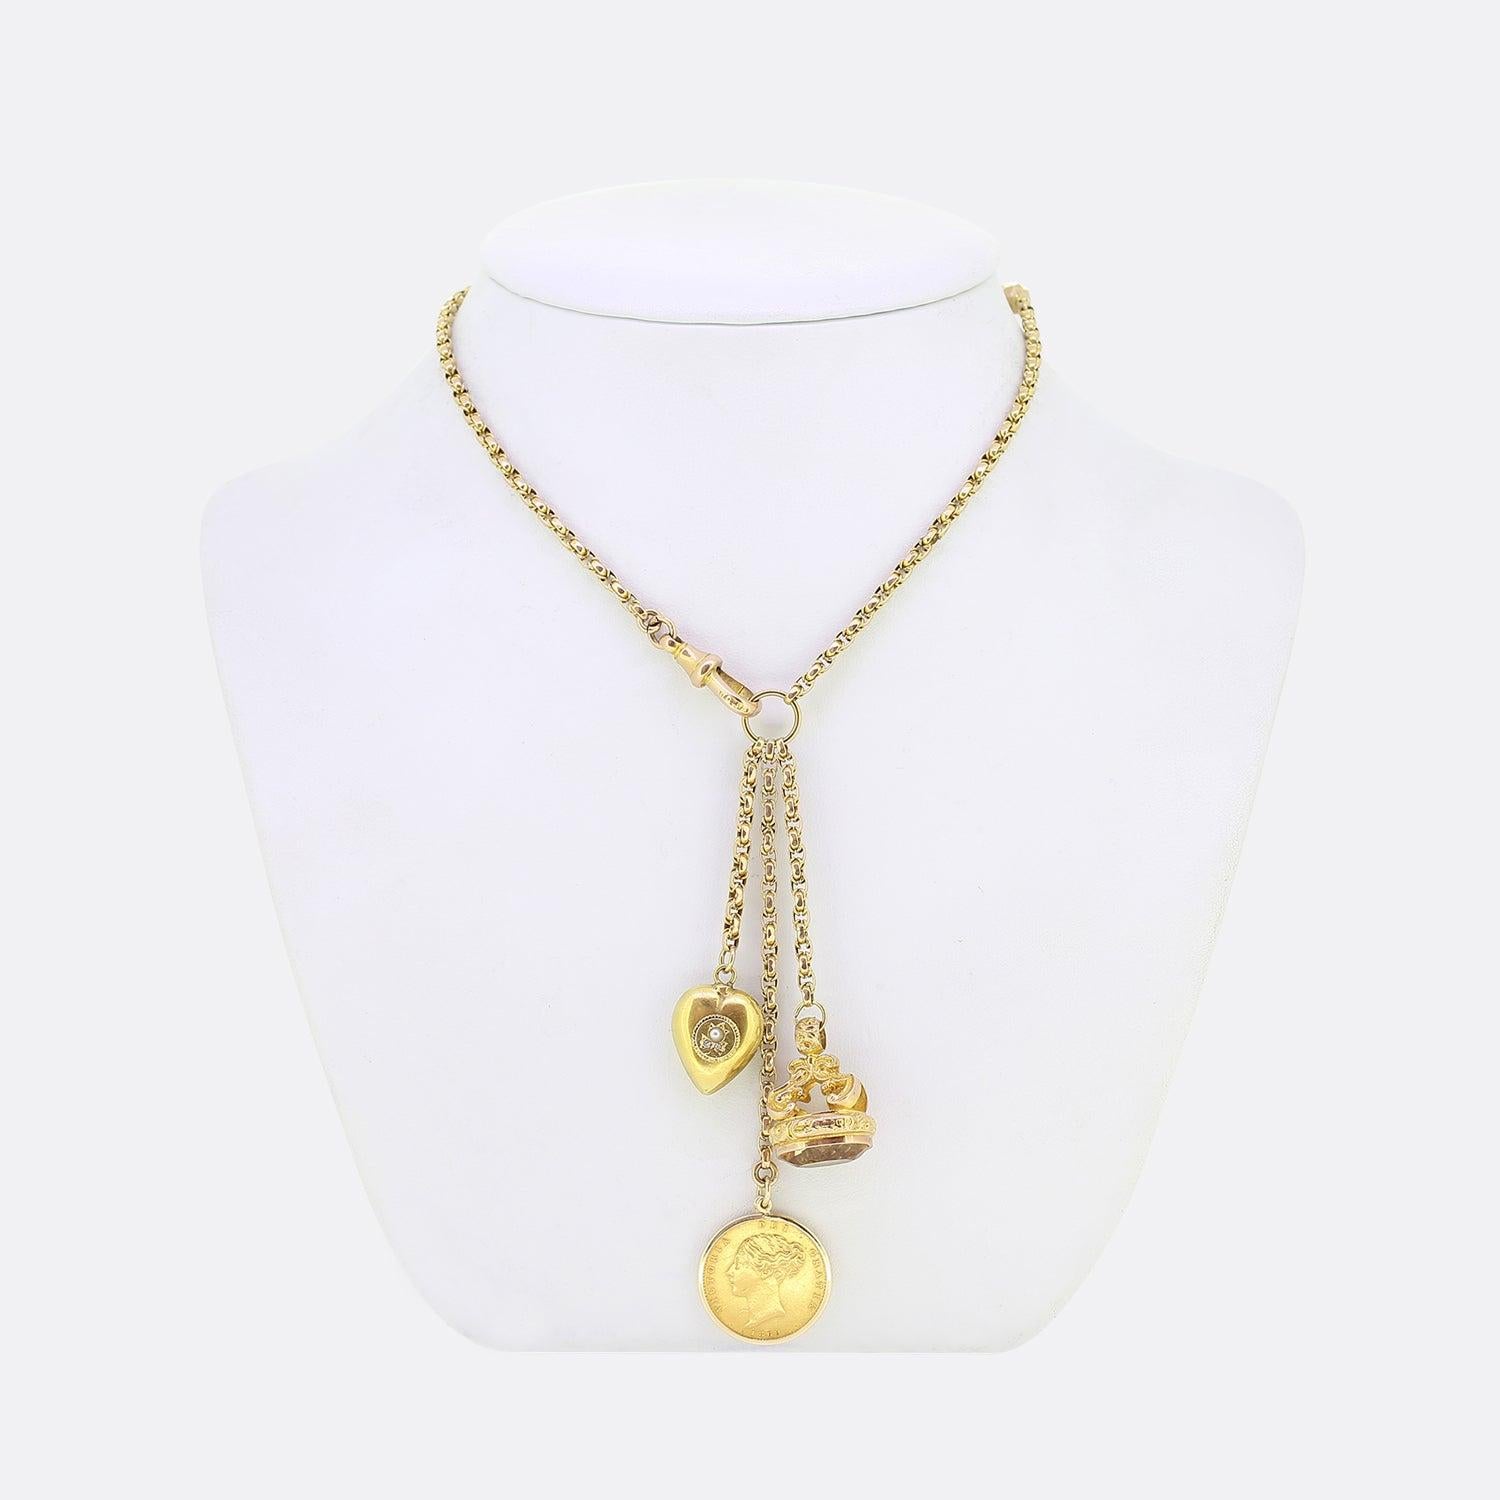 Here we have a vintage 9ct yellow gold faceted belcher chain charm necklace. The necklace plays host to a trio of pendants including an ornate citrine set fob, pearl and rose cut diamond set love heart and finally a 22ct sovereign coin featuring a